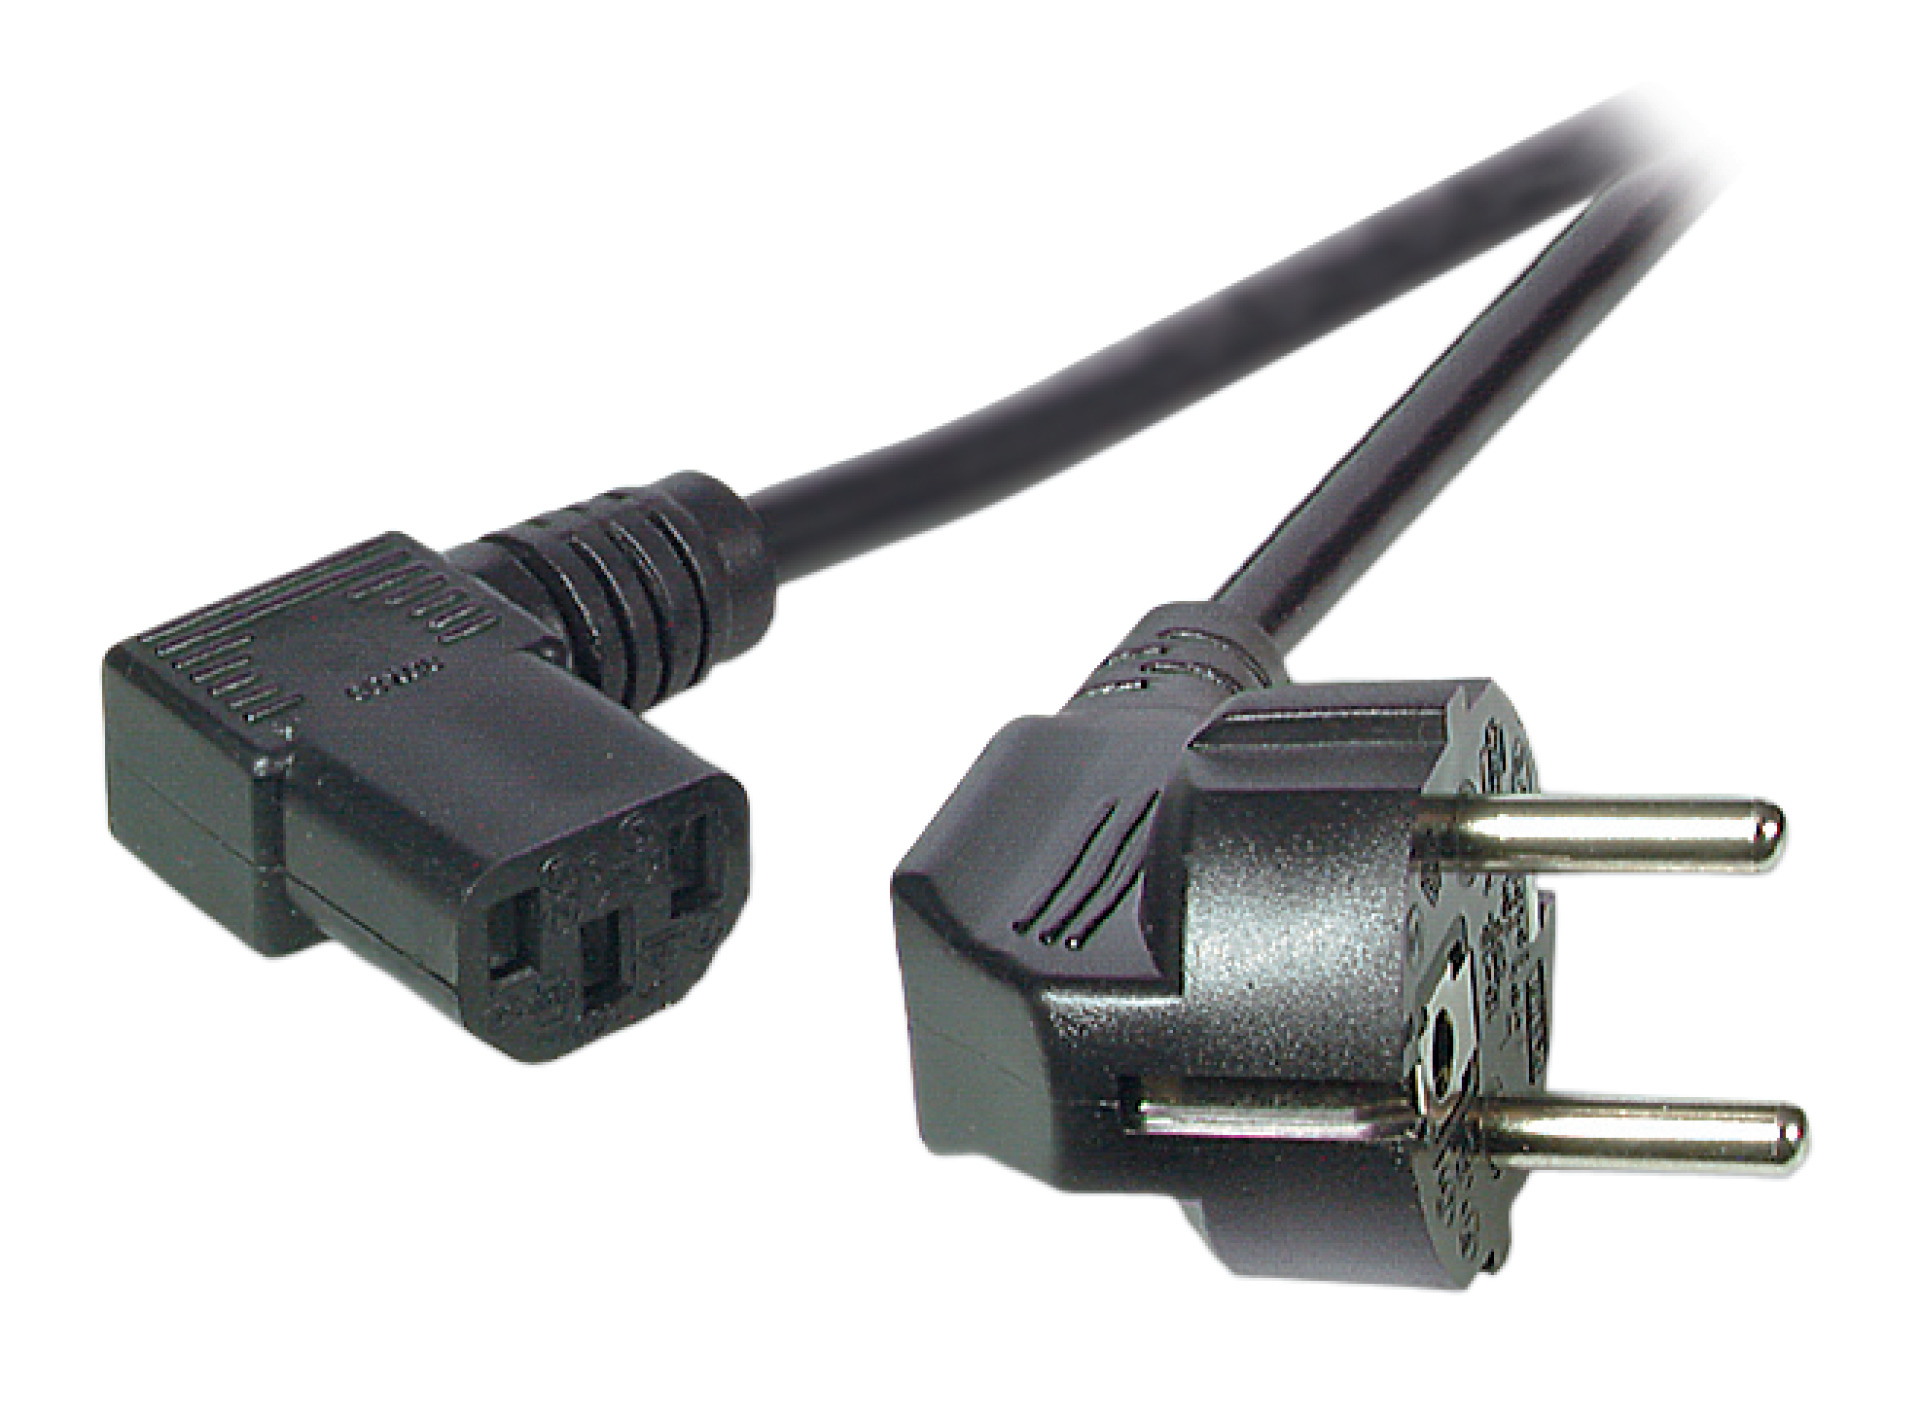 Power Cable CEE7/7 90° - C13 90°, Black, 2.0 m, 3 x 0.75 mm²